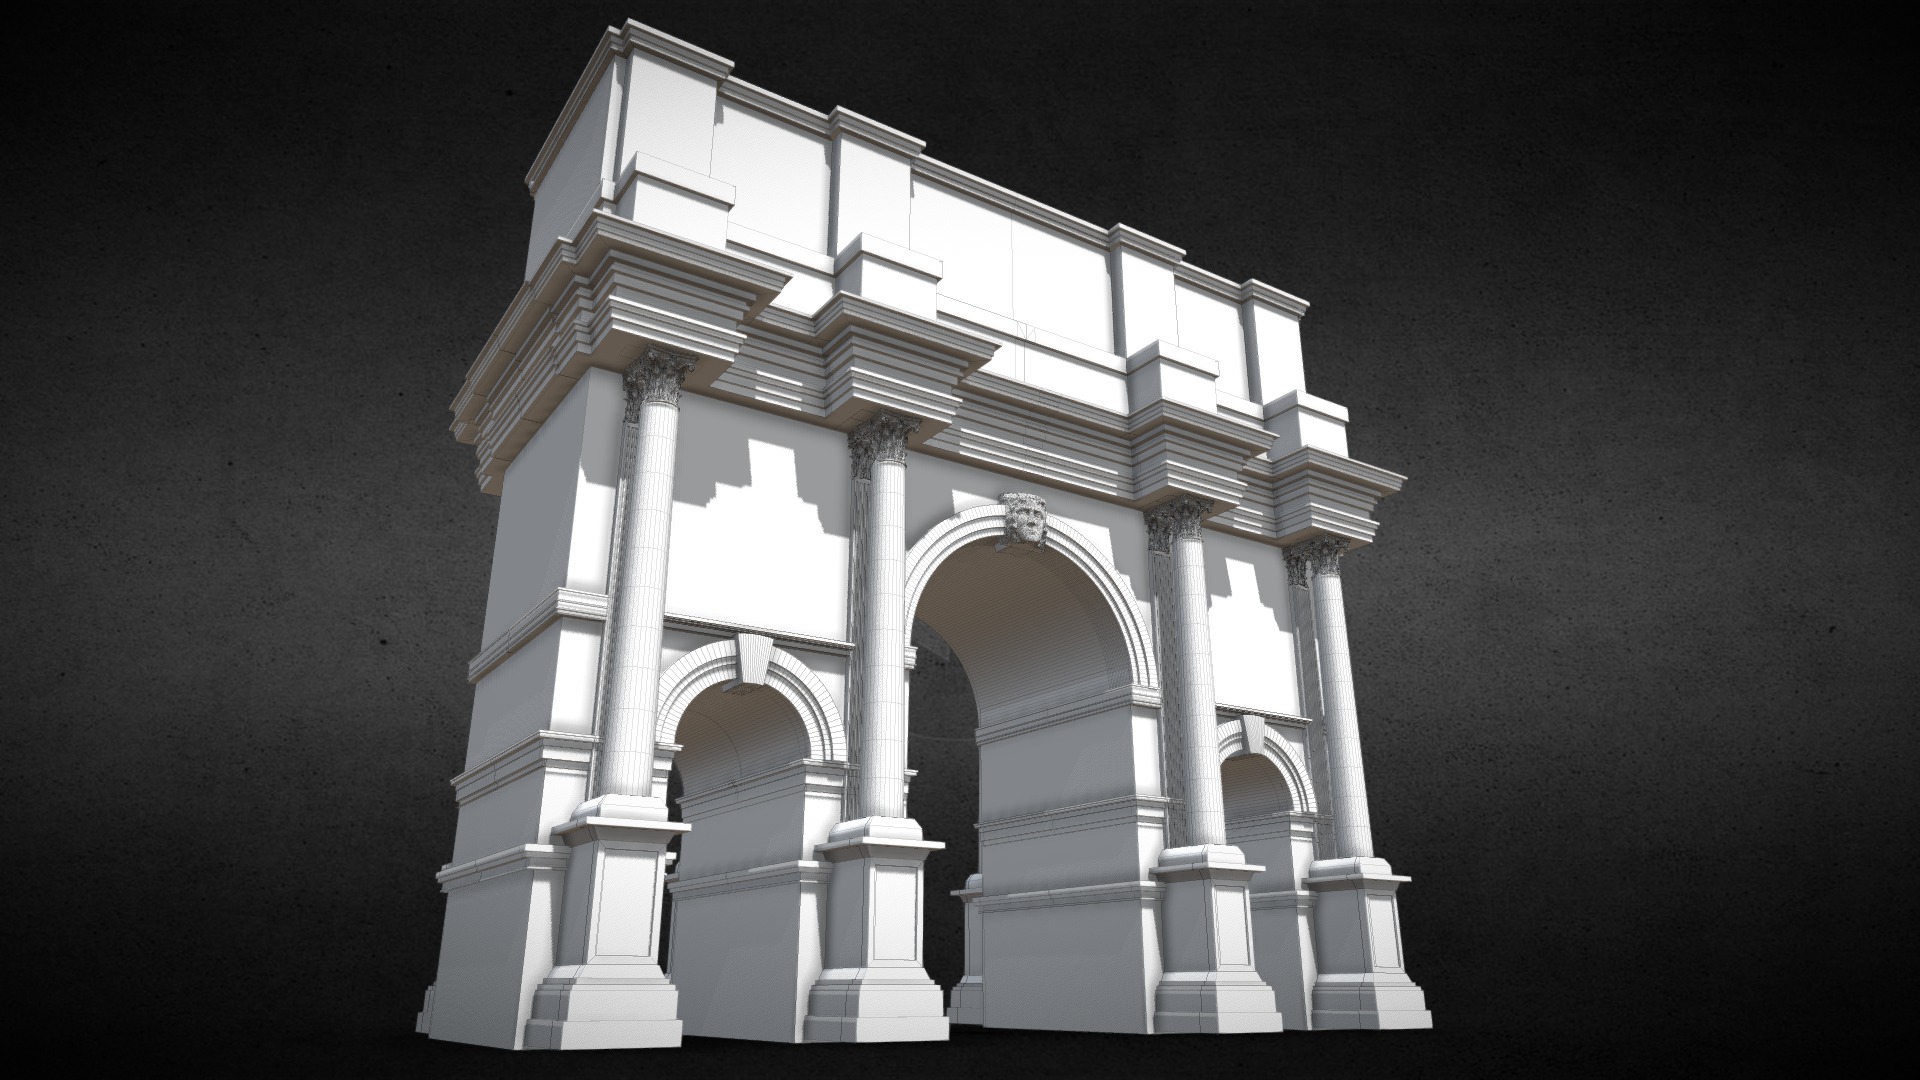 Virtual reconstruction of the Arc de Triomphe in the Costantine's Forum, Byzantium, now Istanbul.

Reconstruction process, digital modeling and model finalization by Ylenia Ricci, Andrea Pasquali and Giorgio Verdiani - Arc de Triomphe, Costantine's Forum, Byzantium - 3D model by g.verdiani_DIDA 3d model